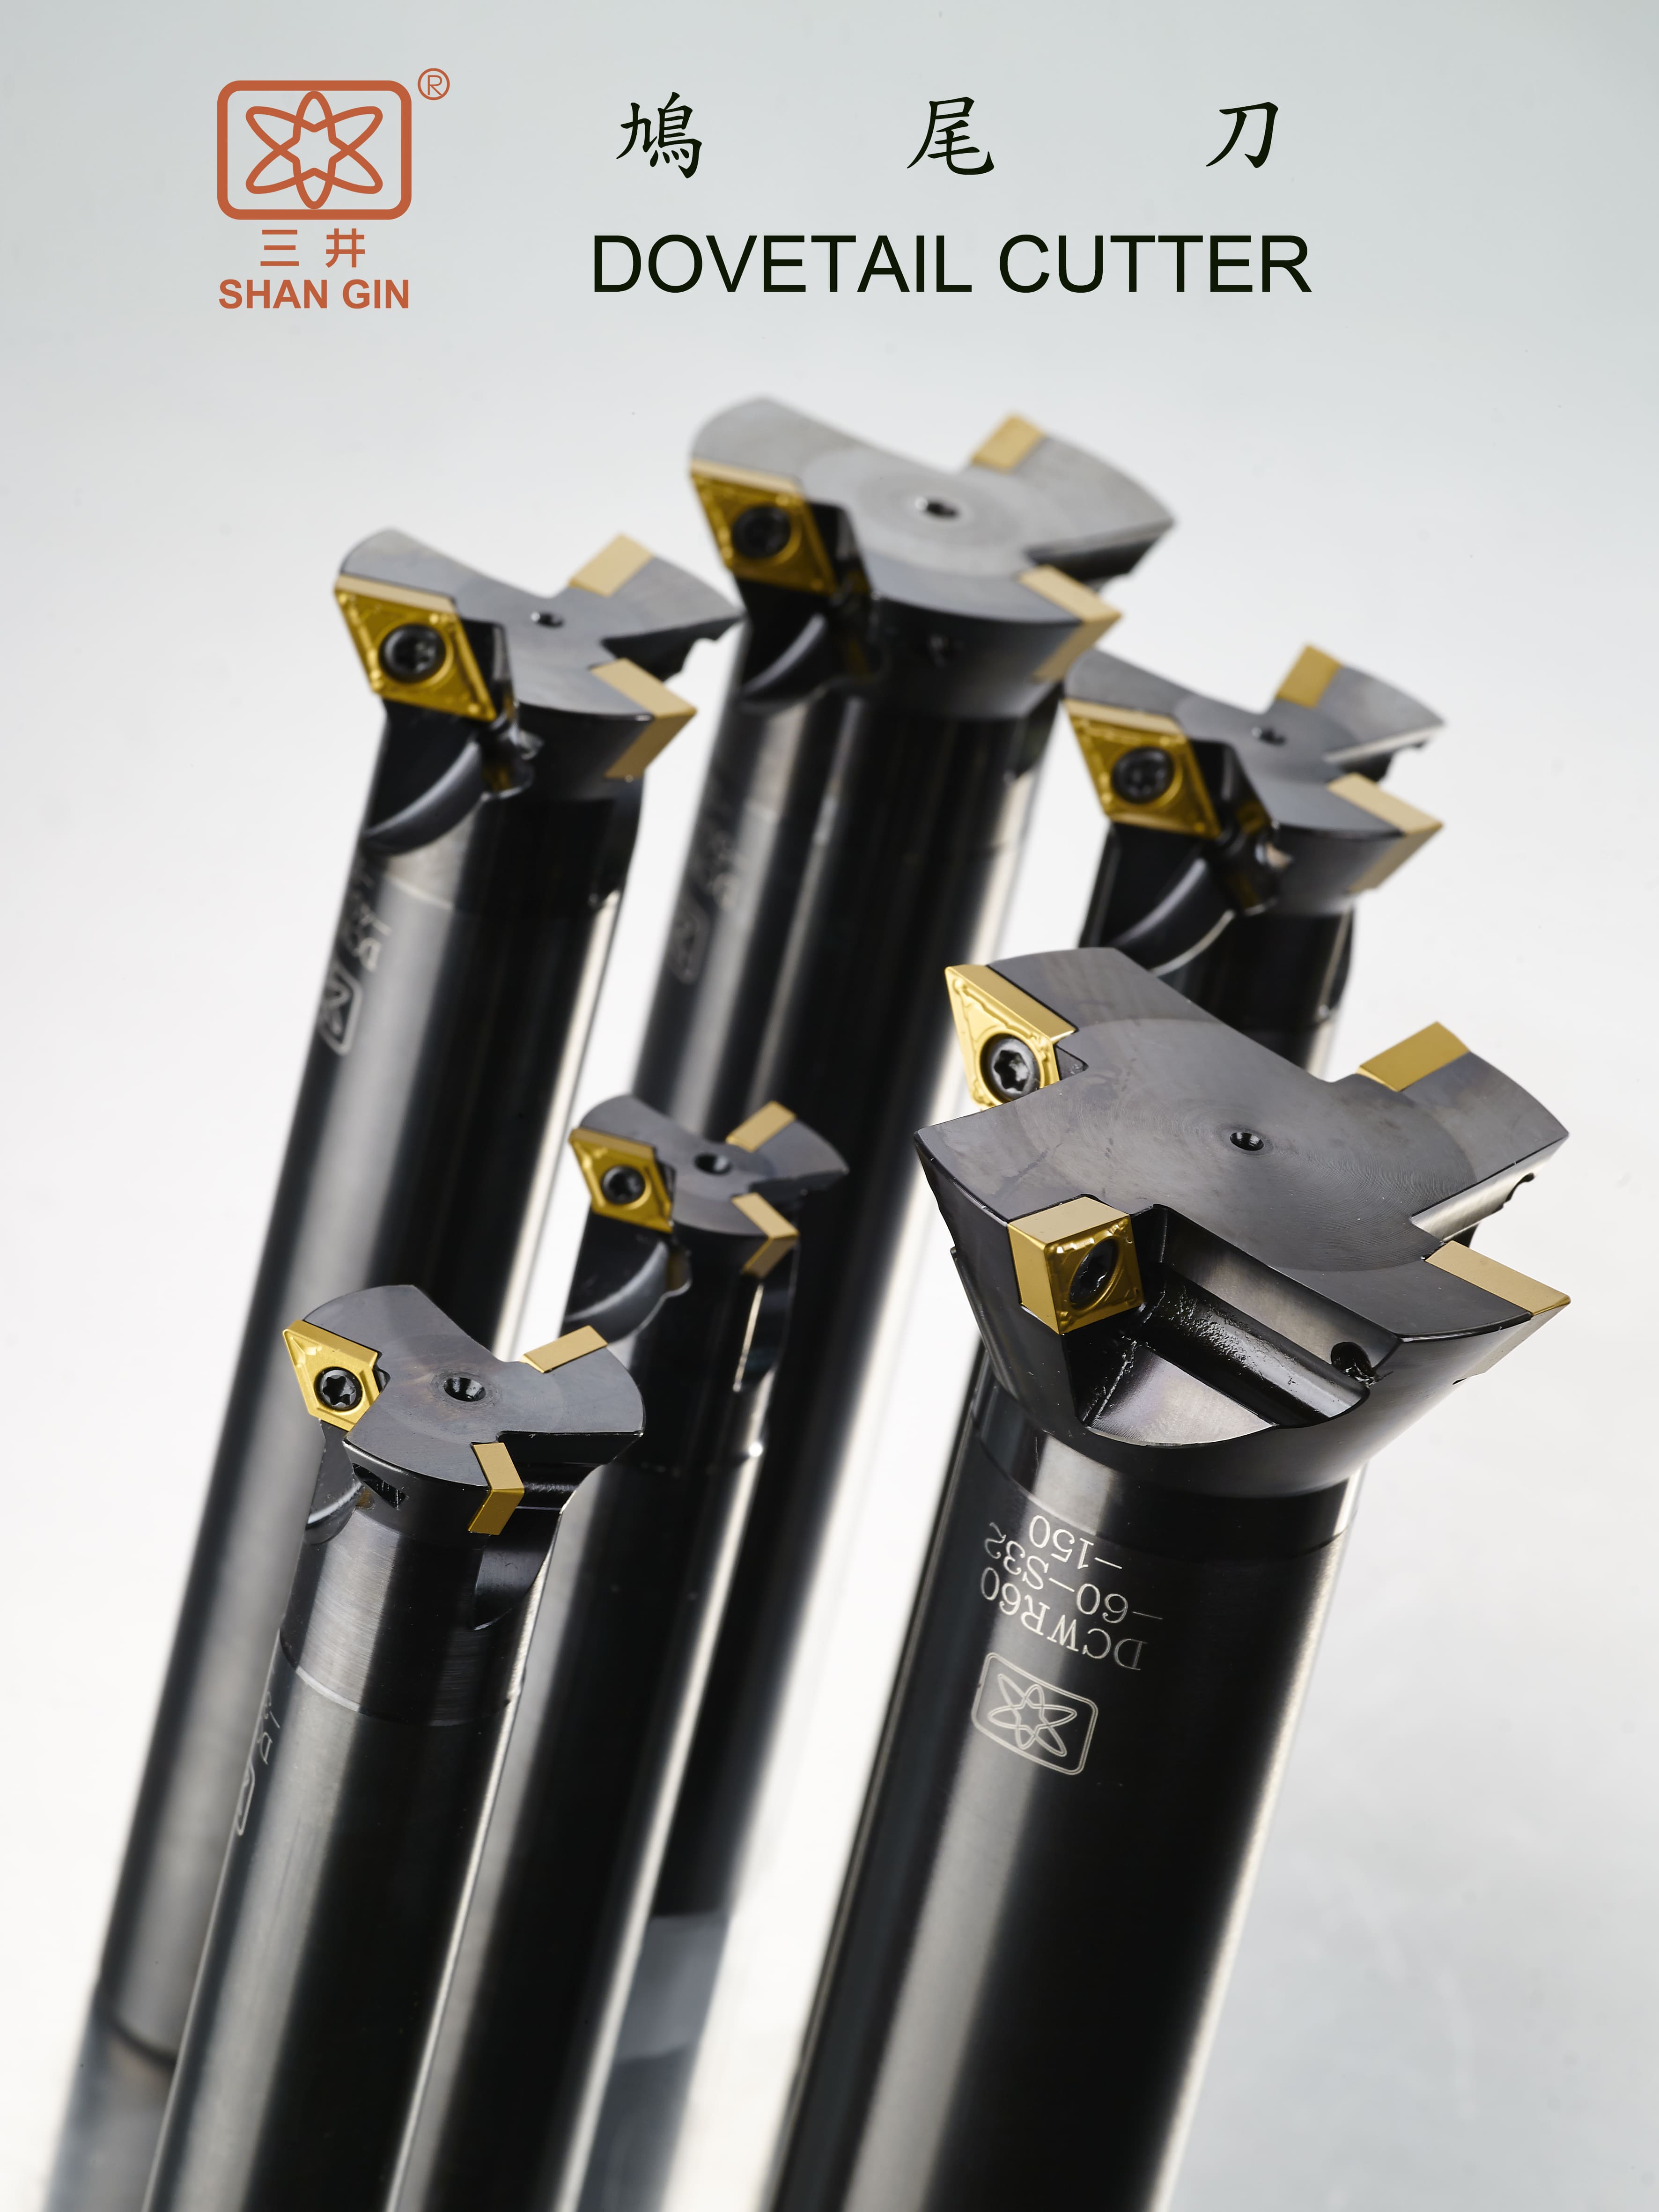 Catalog|DOVETAIL CUTTER